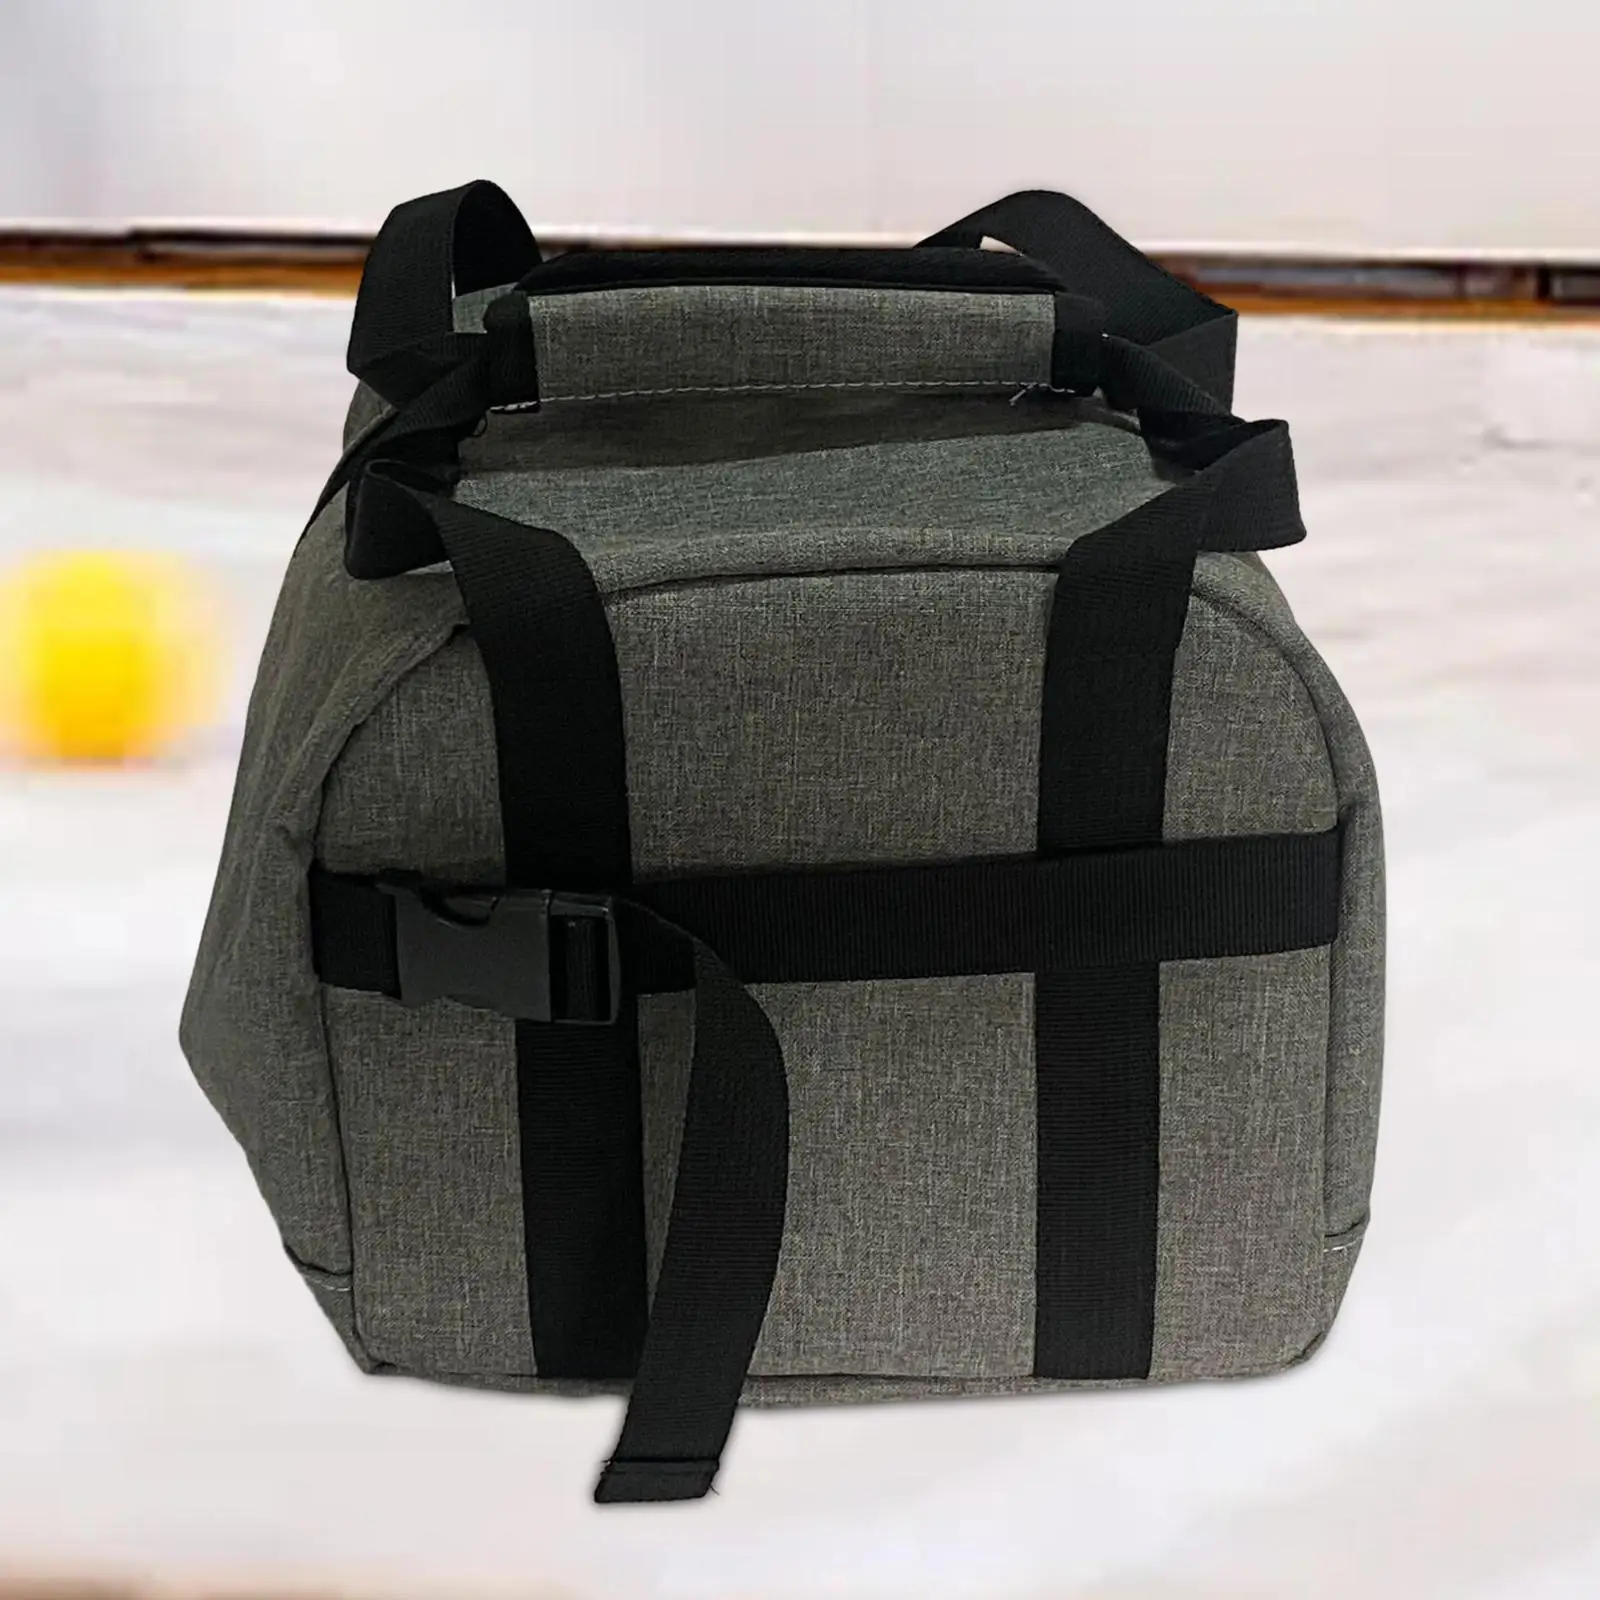 Single Bowling Ball Bag Carrying Bag Oxford Cloth Compact with Handle with External Mesh Pocket Bowling Tote Bowling Accessories